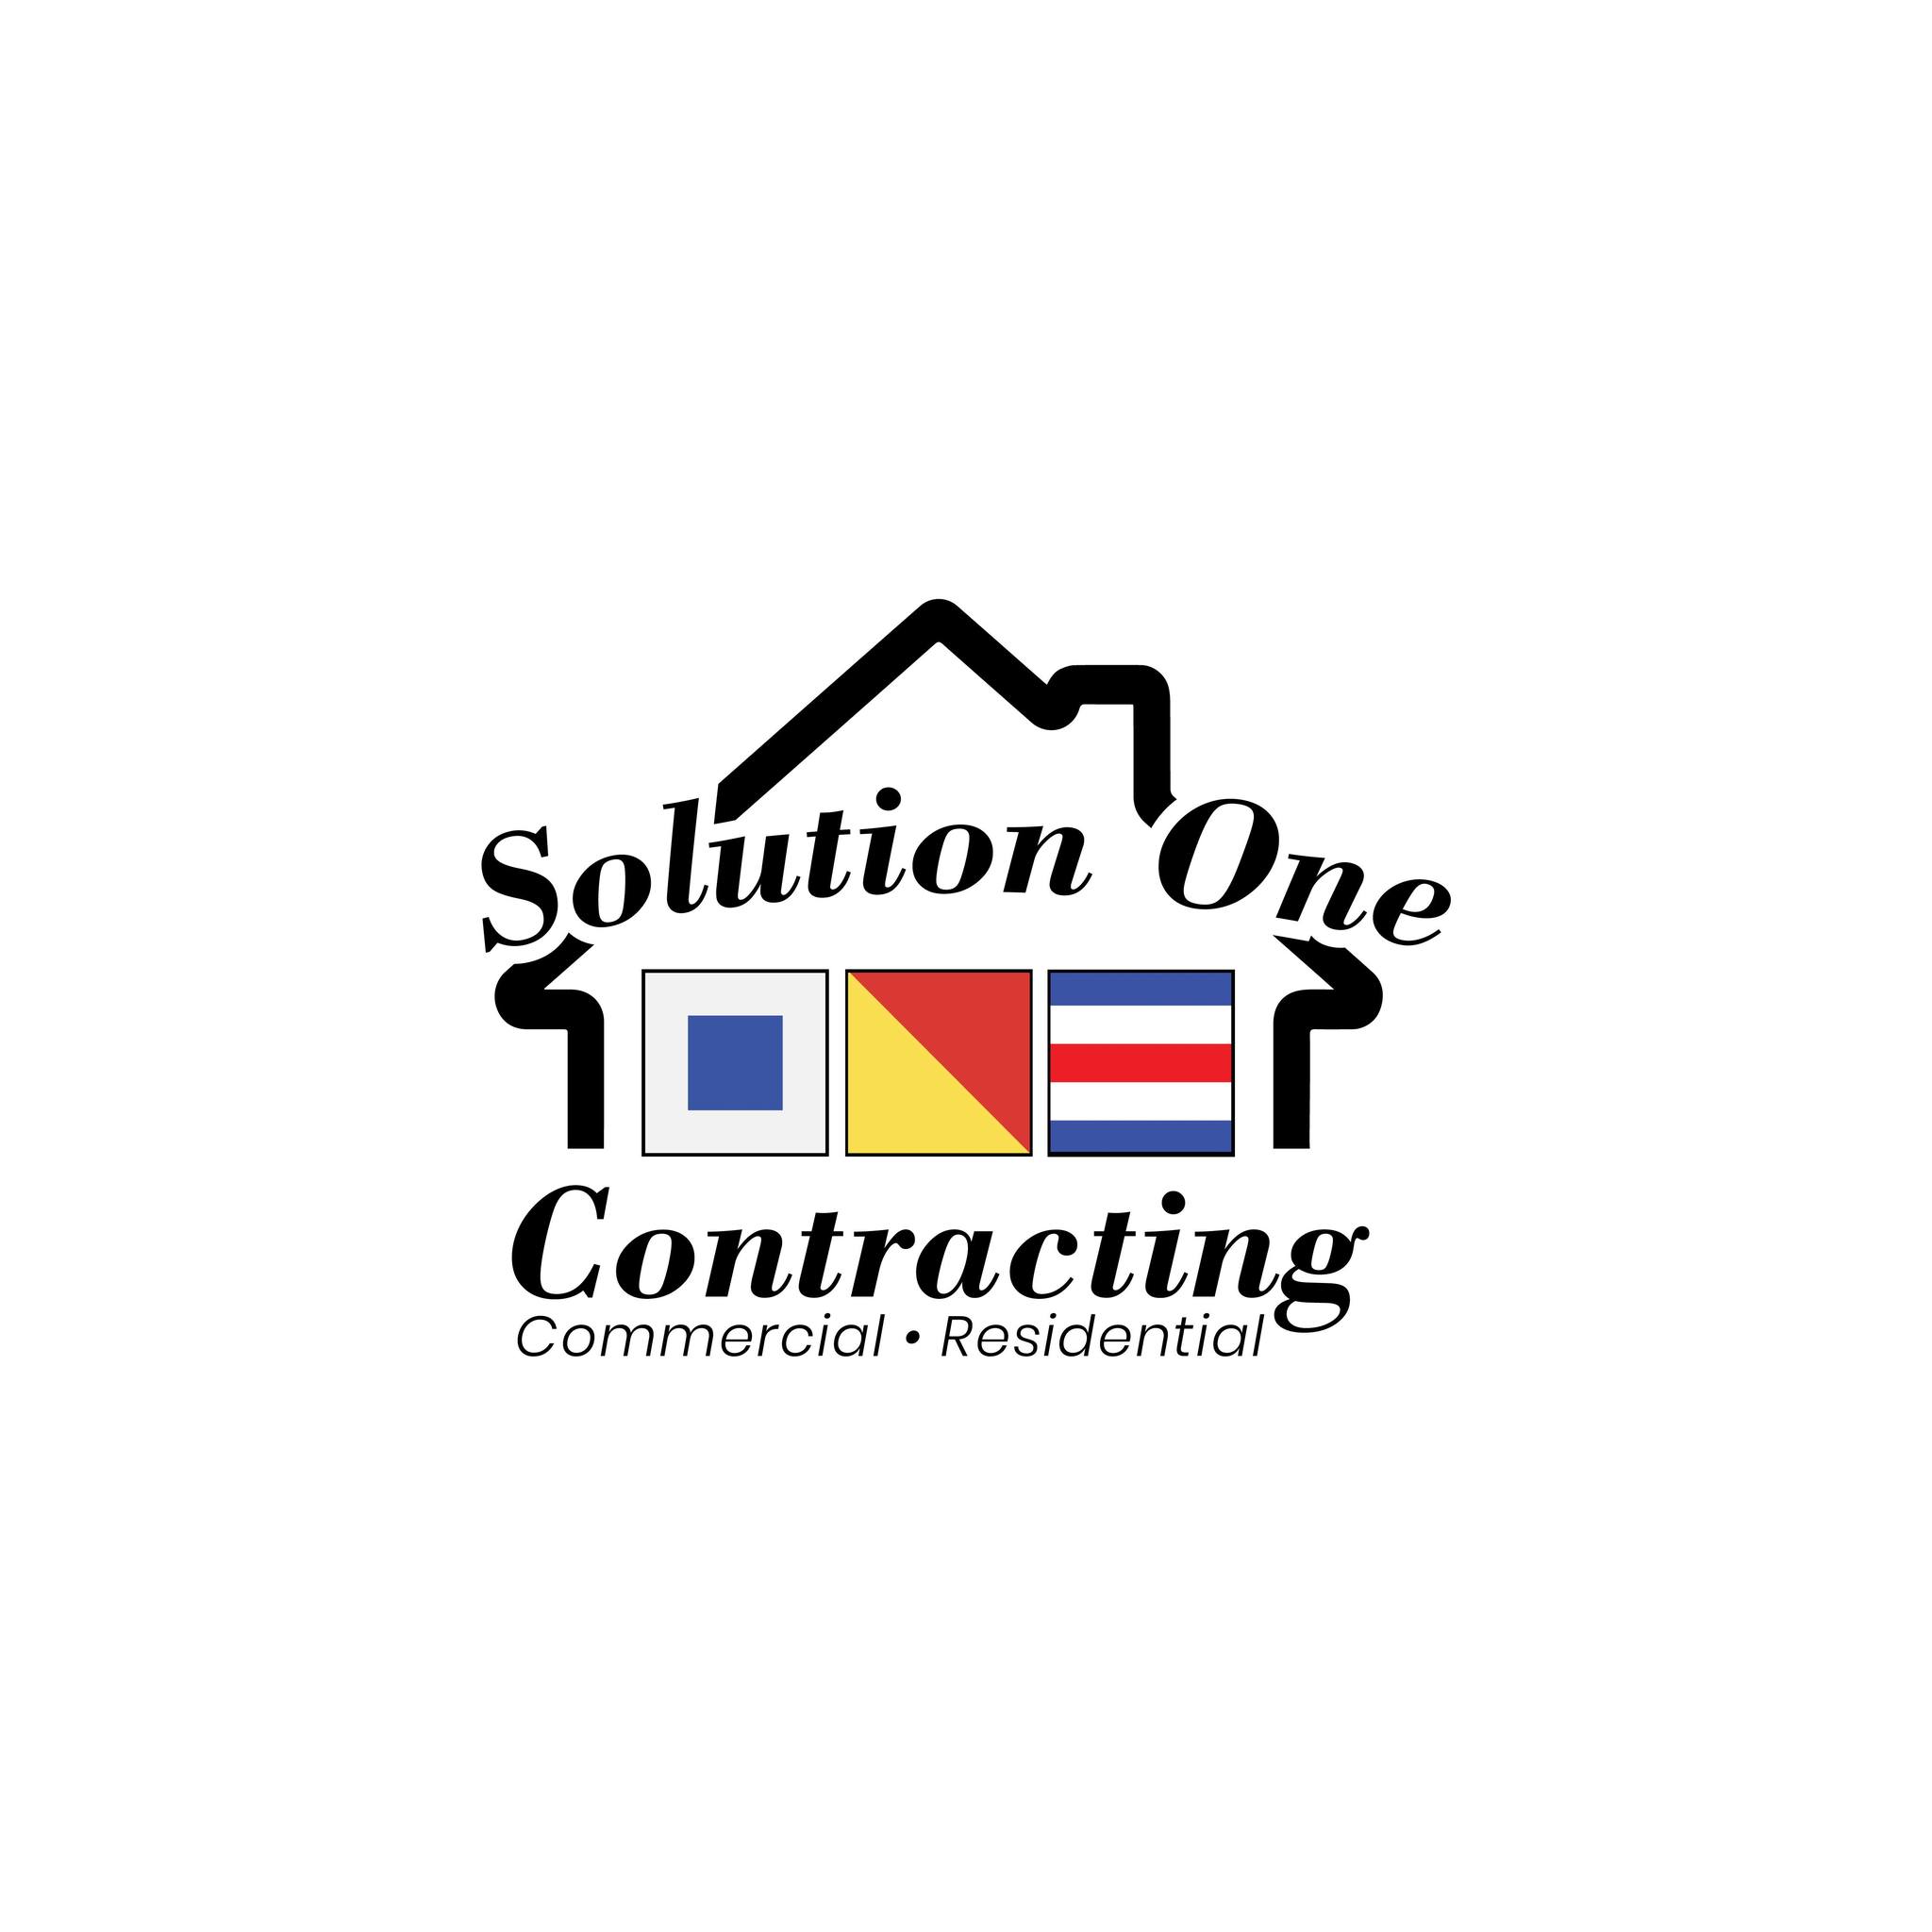 Solution-One-Contracting-logo.jpg